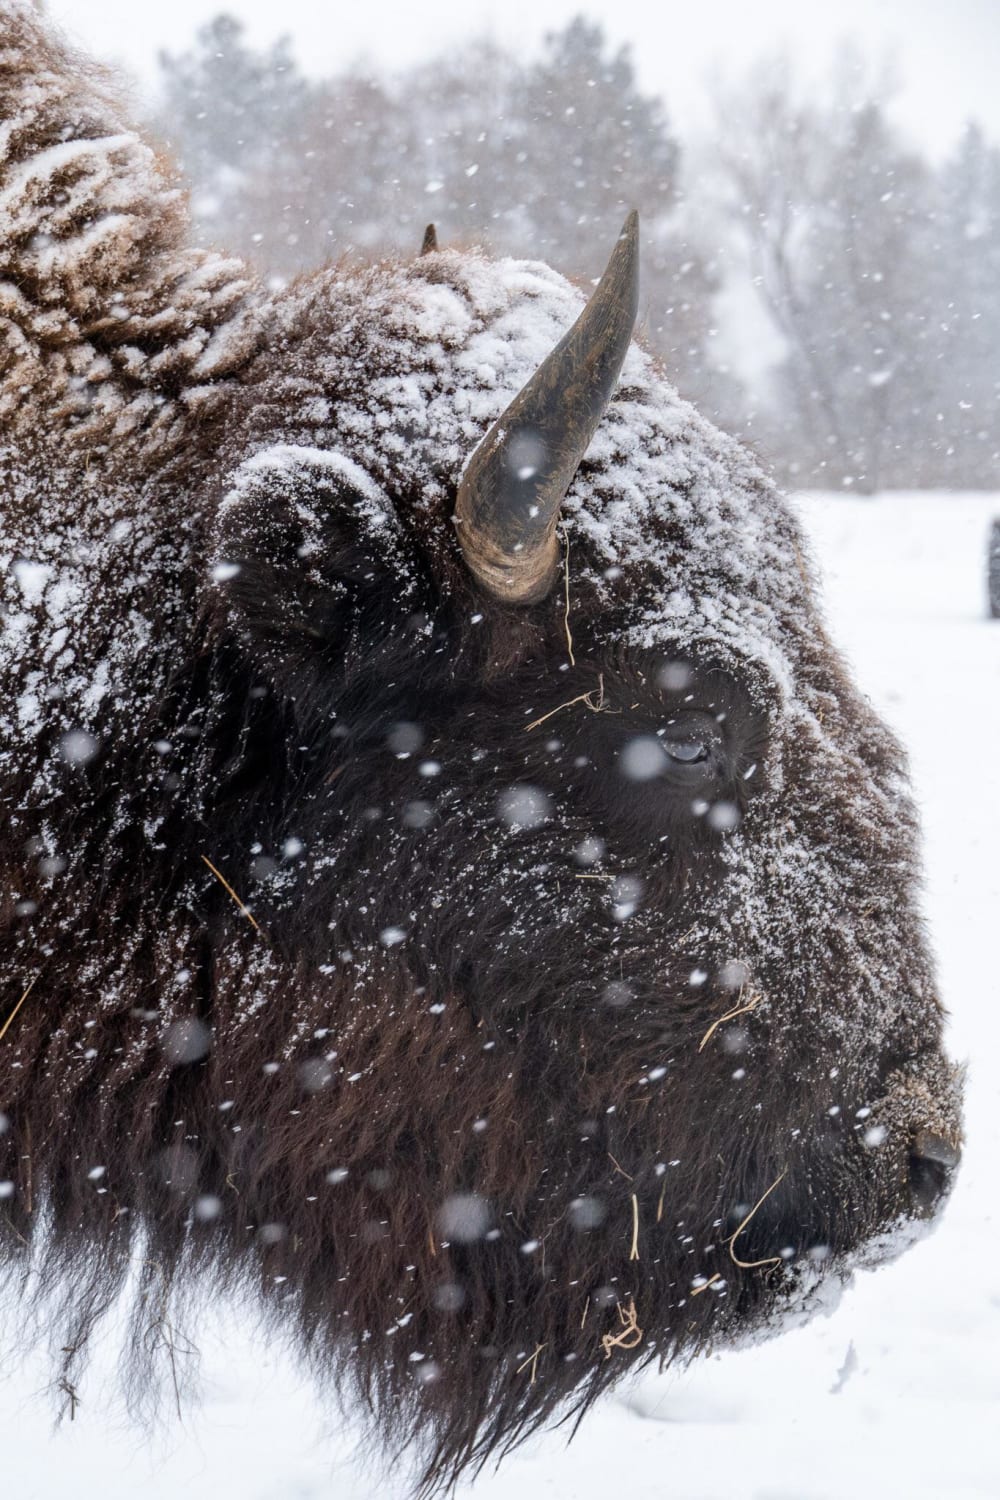 ITAP of bison during a snow